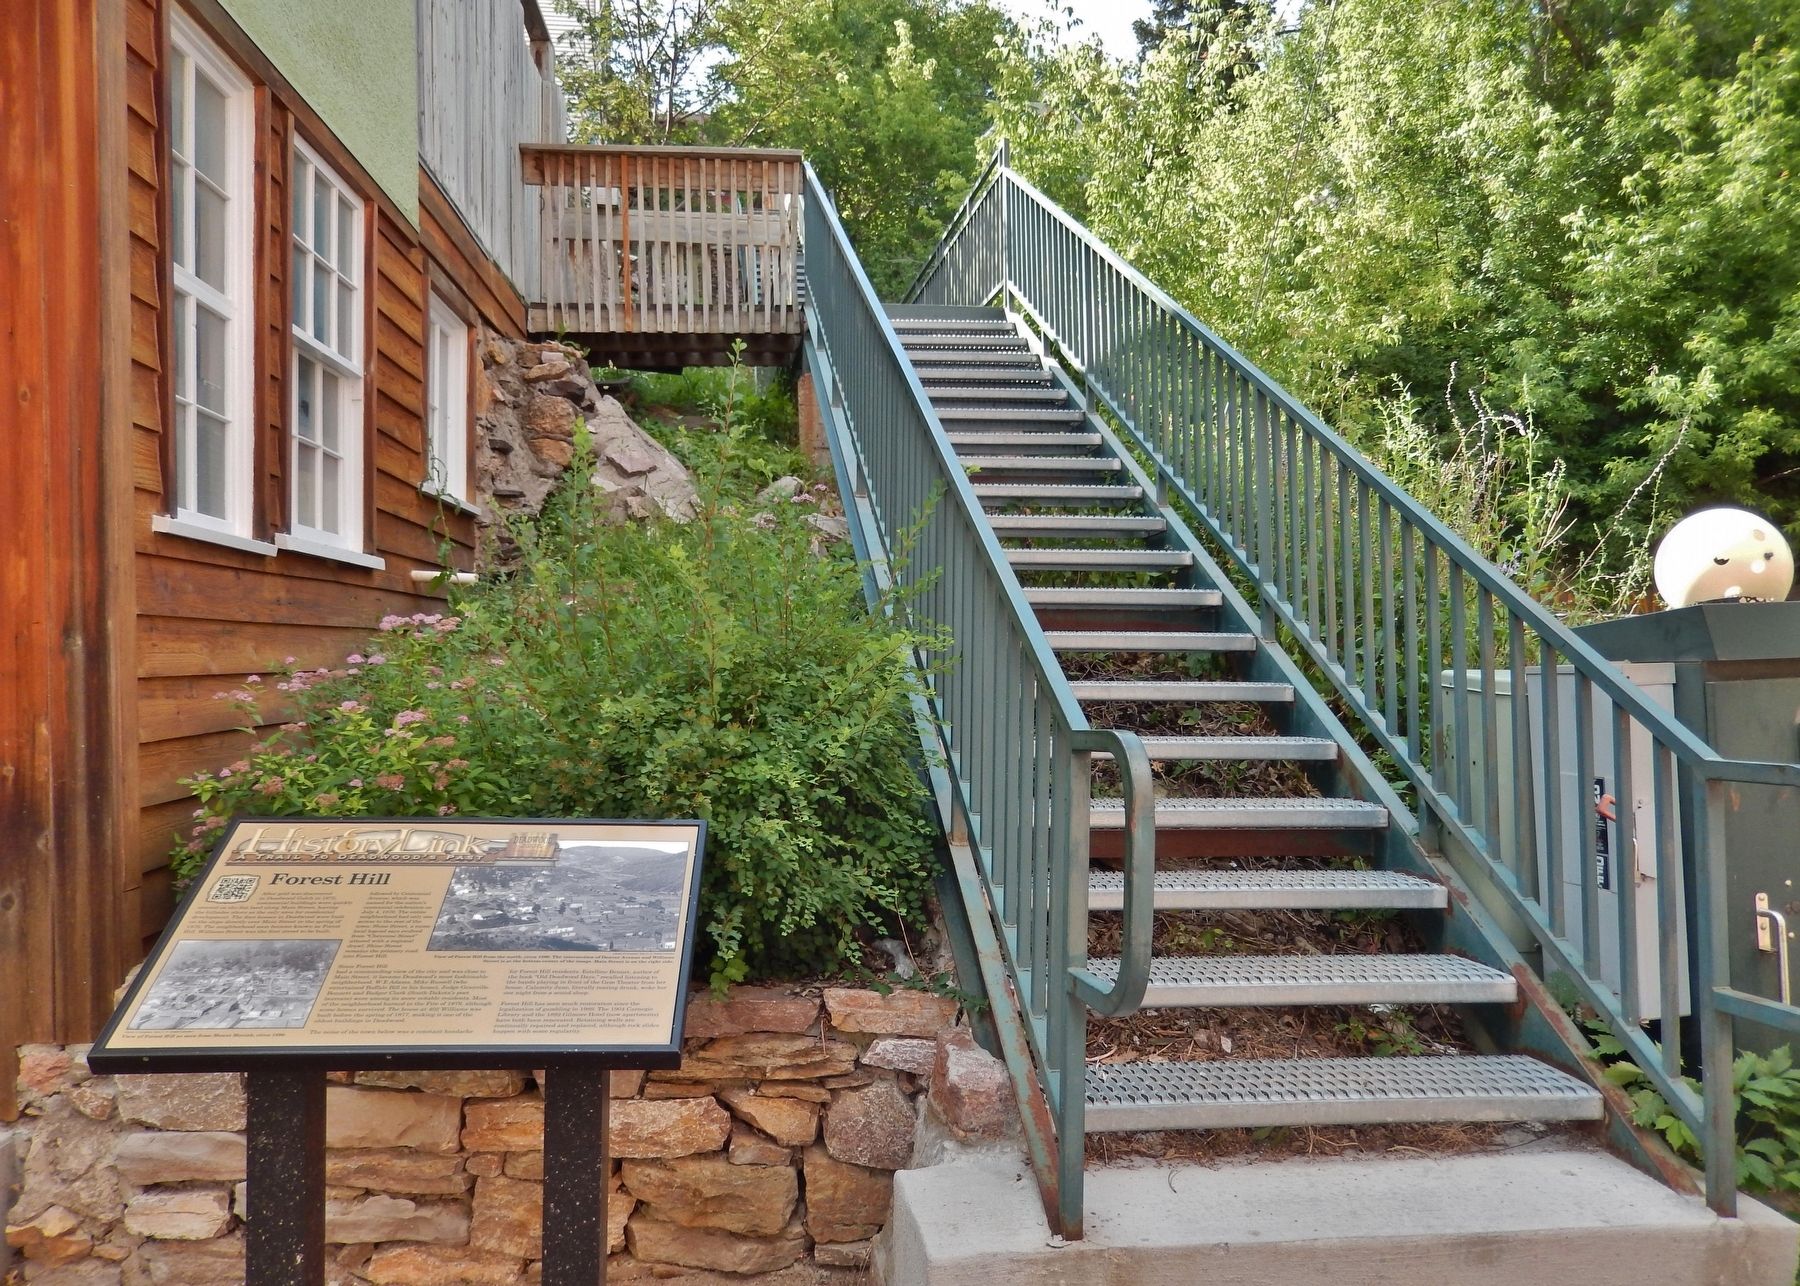 Forest Hill Marker (<i>wide view; staircase up to Williams Street just right of marker</i>) image. Click for full size.